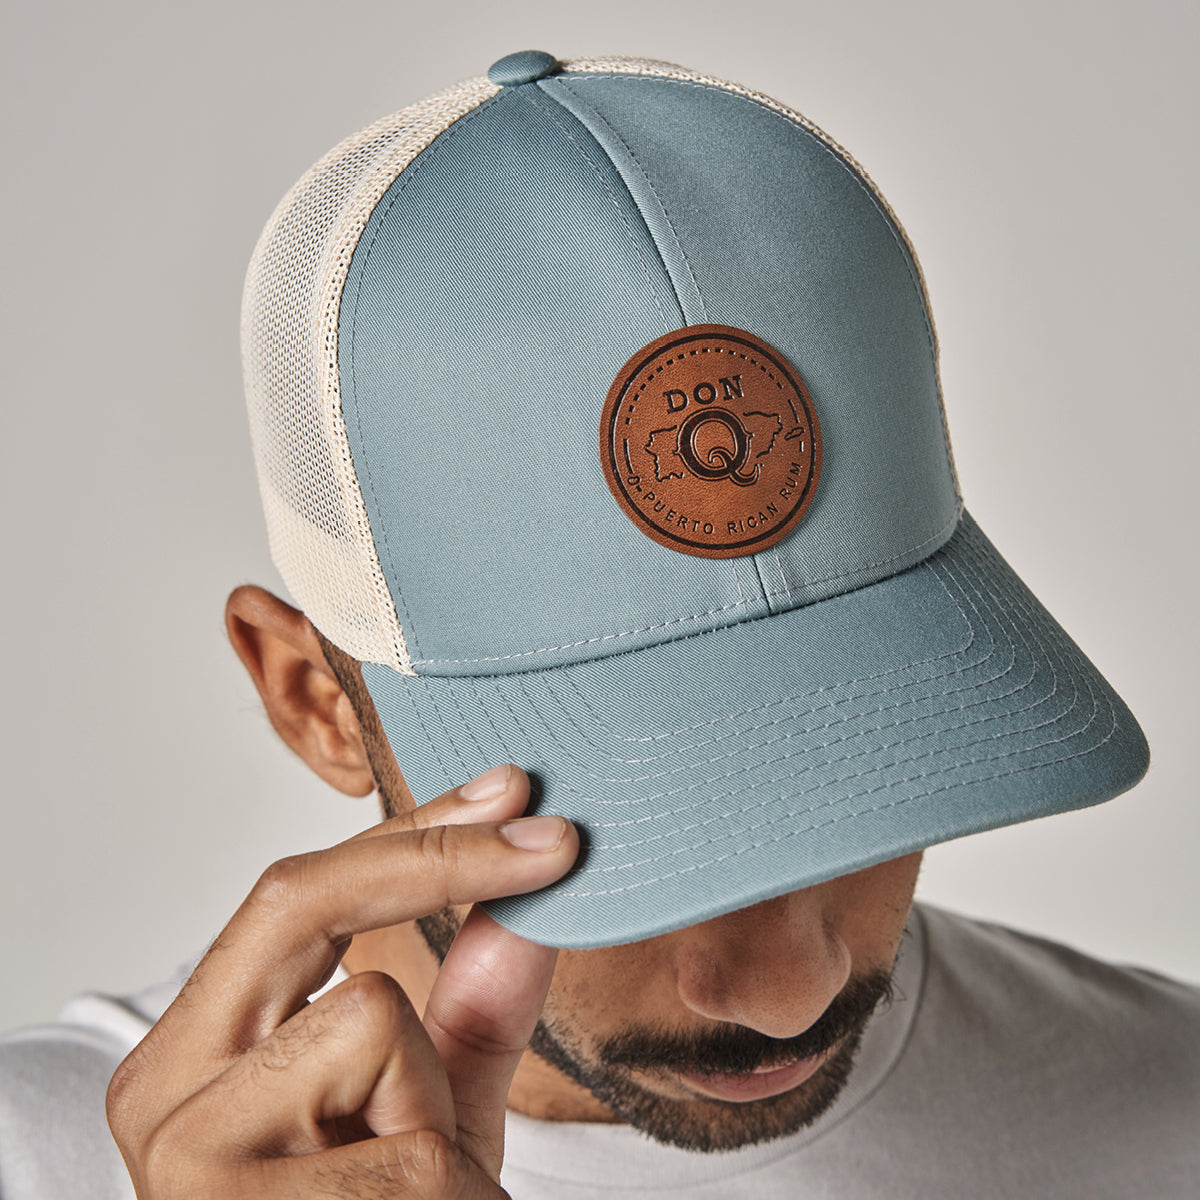 Don Q Cap Smoke with Leather Logo